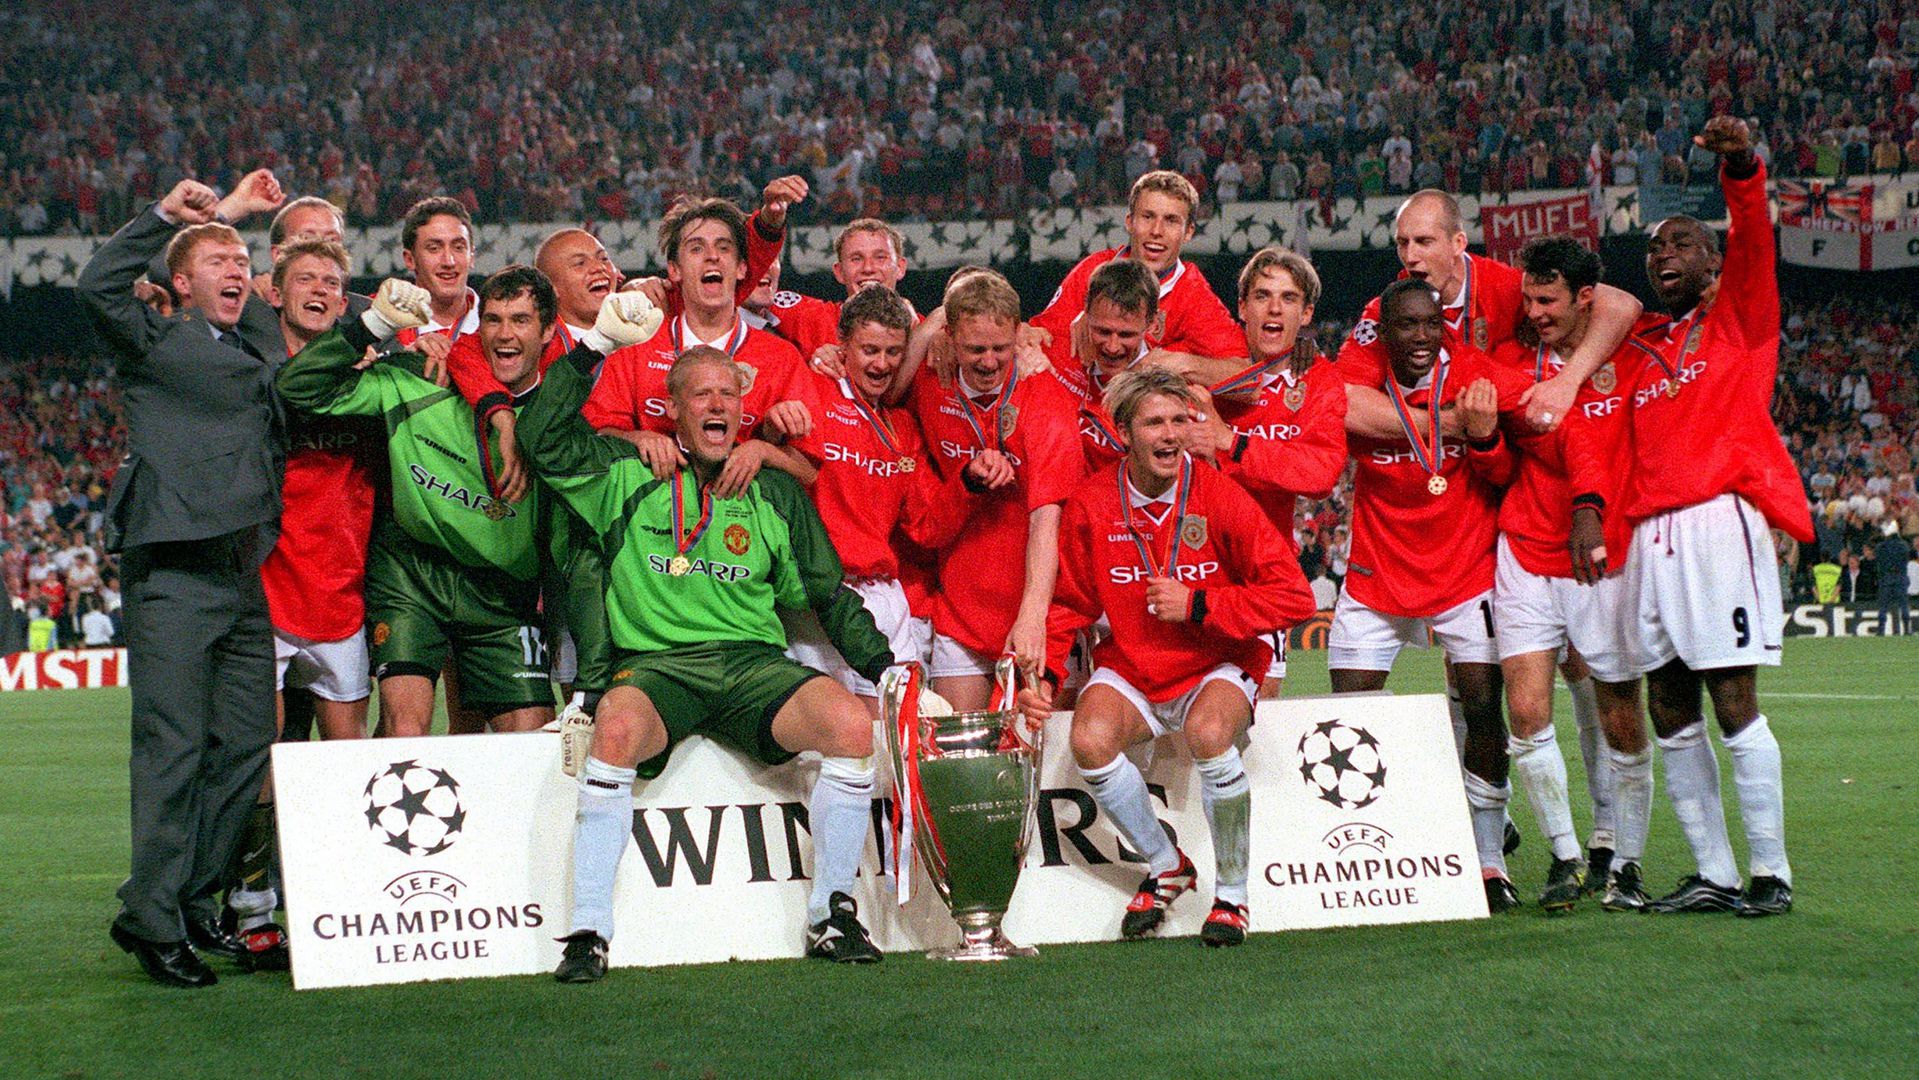 26th MAY 1999. UEFA Champions League Final. Barcelona, Spain. Manchester United 2 v Bayern Munich 1. Manchester United team celebrate with the European Cup trophy after the match